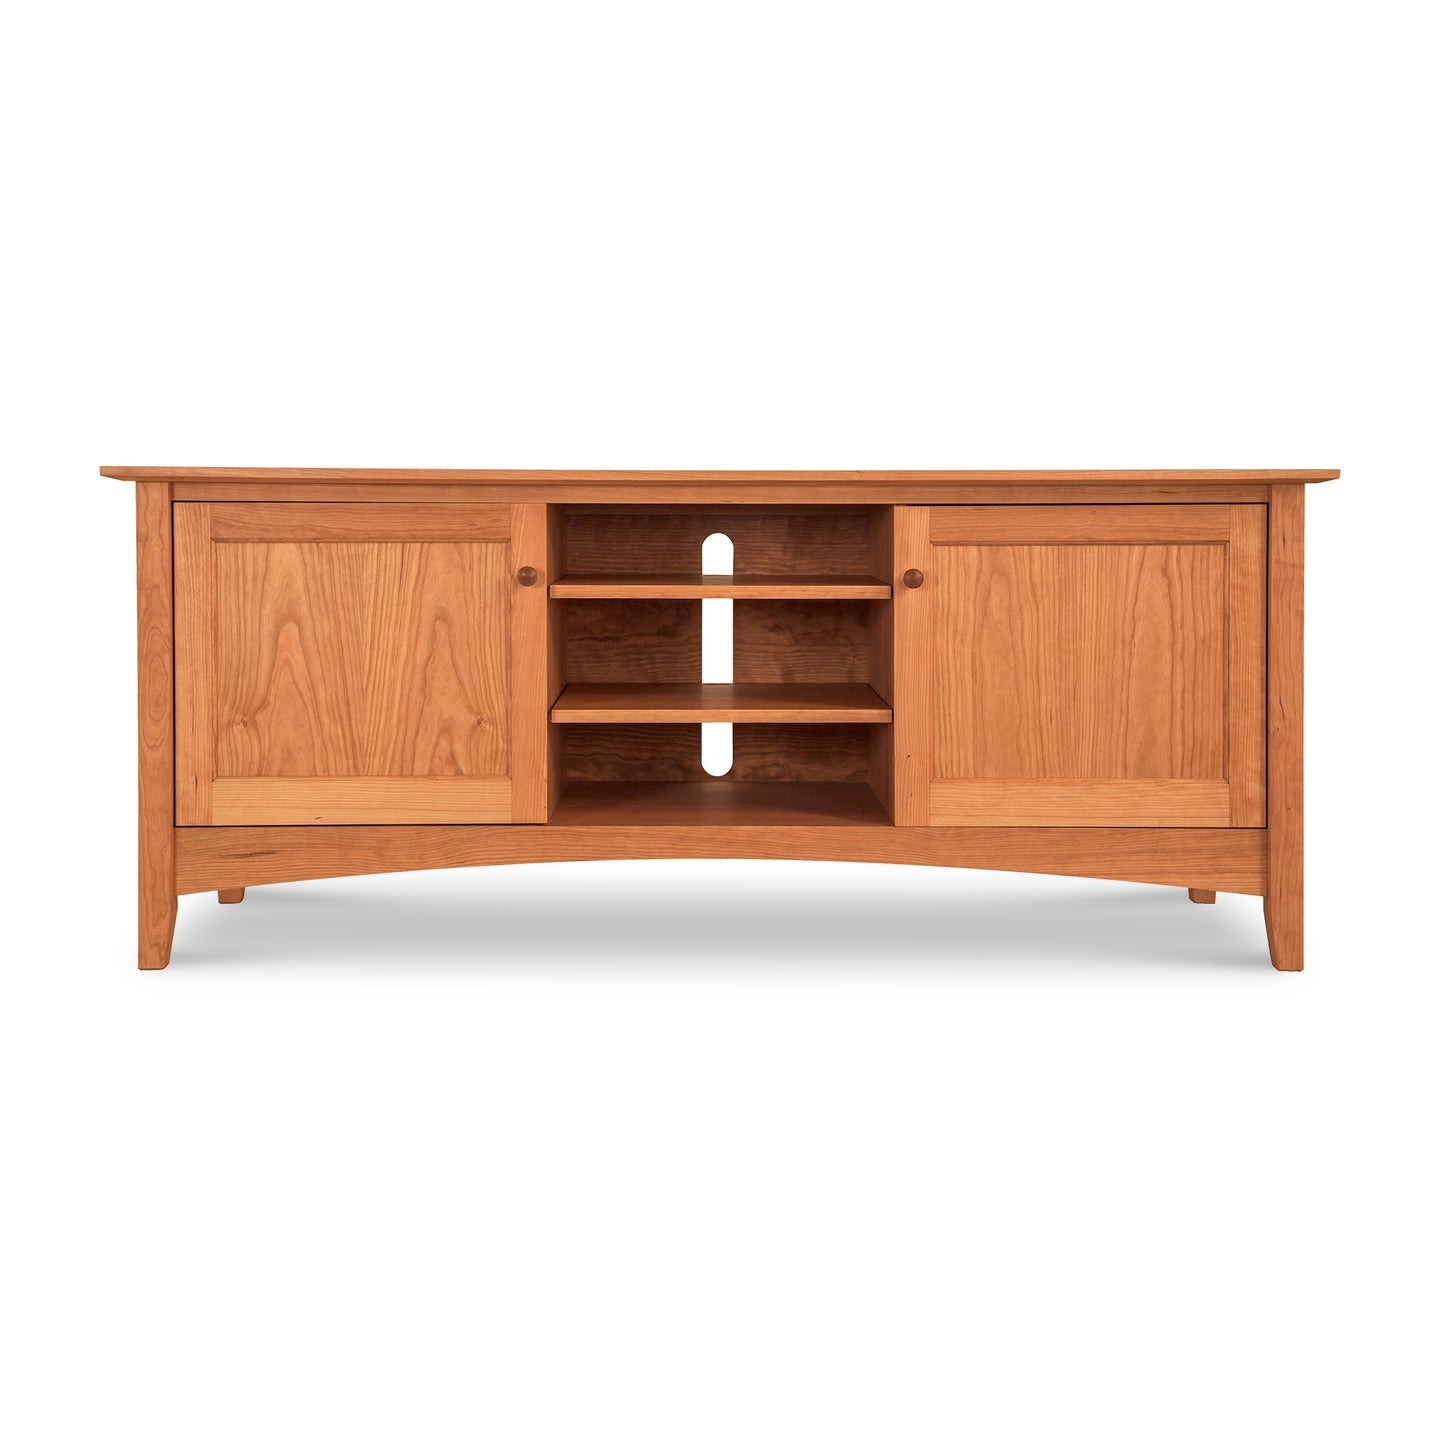 Solid hardwoods Maple Corner Woodworks American Shaker 67" TV Stand with open shelves and closed cabinets on a white background.